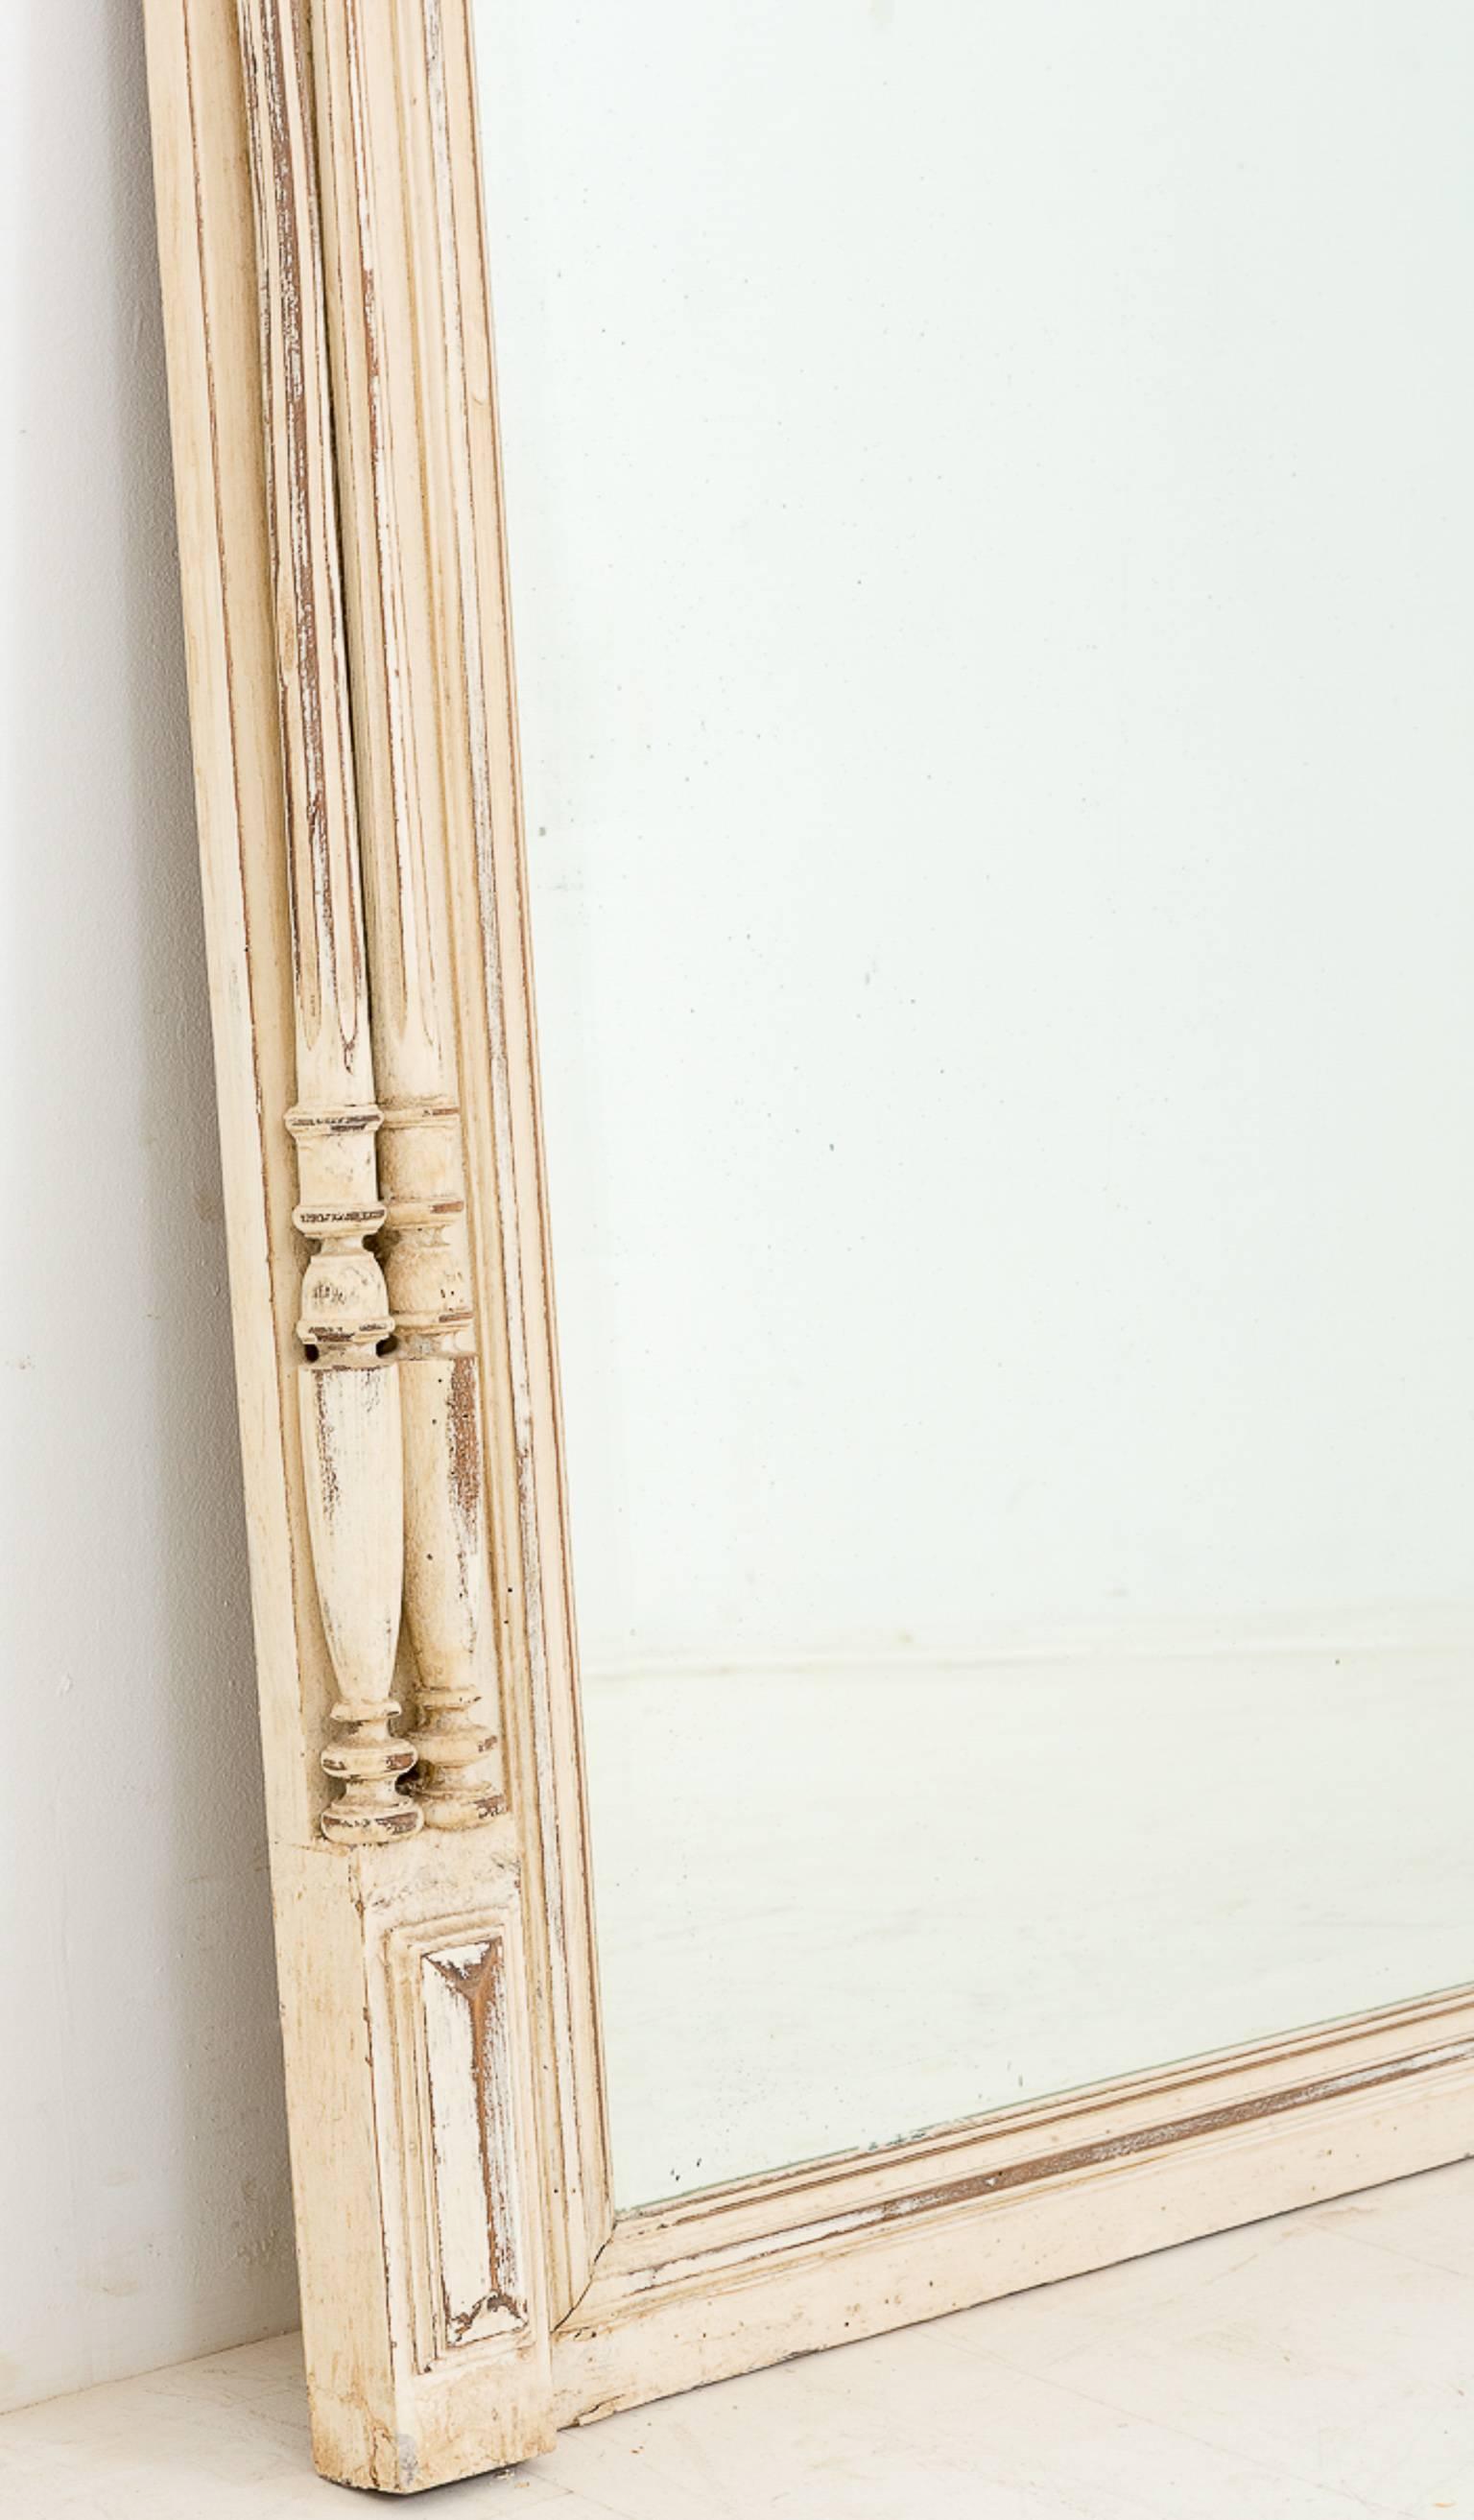 French oak shabby chic pier mirror with original Bevelled plate mirror.
Featuring double ring turned columns and a turned gallery surmounting the top.

Size:
Height 49